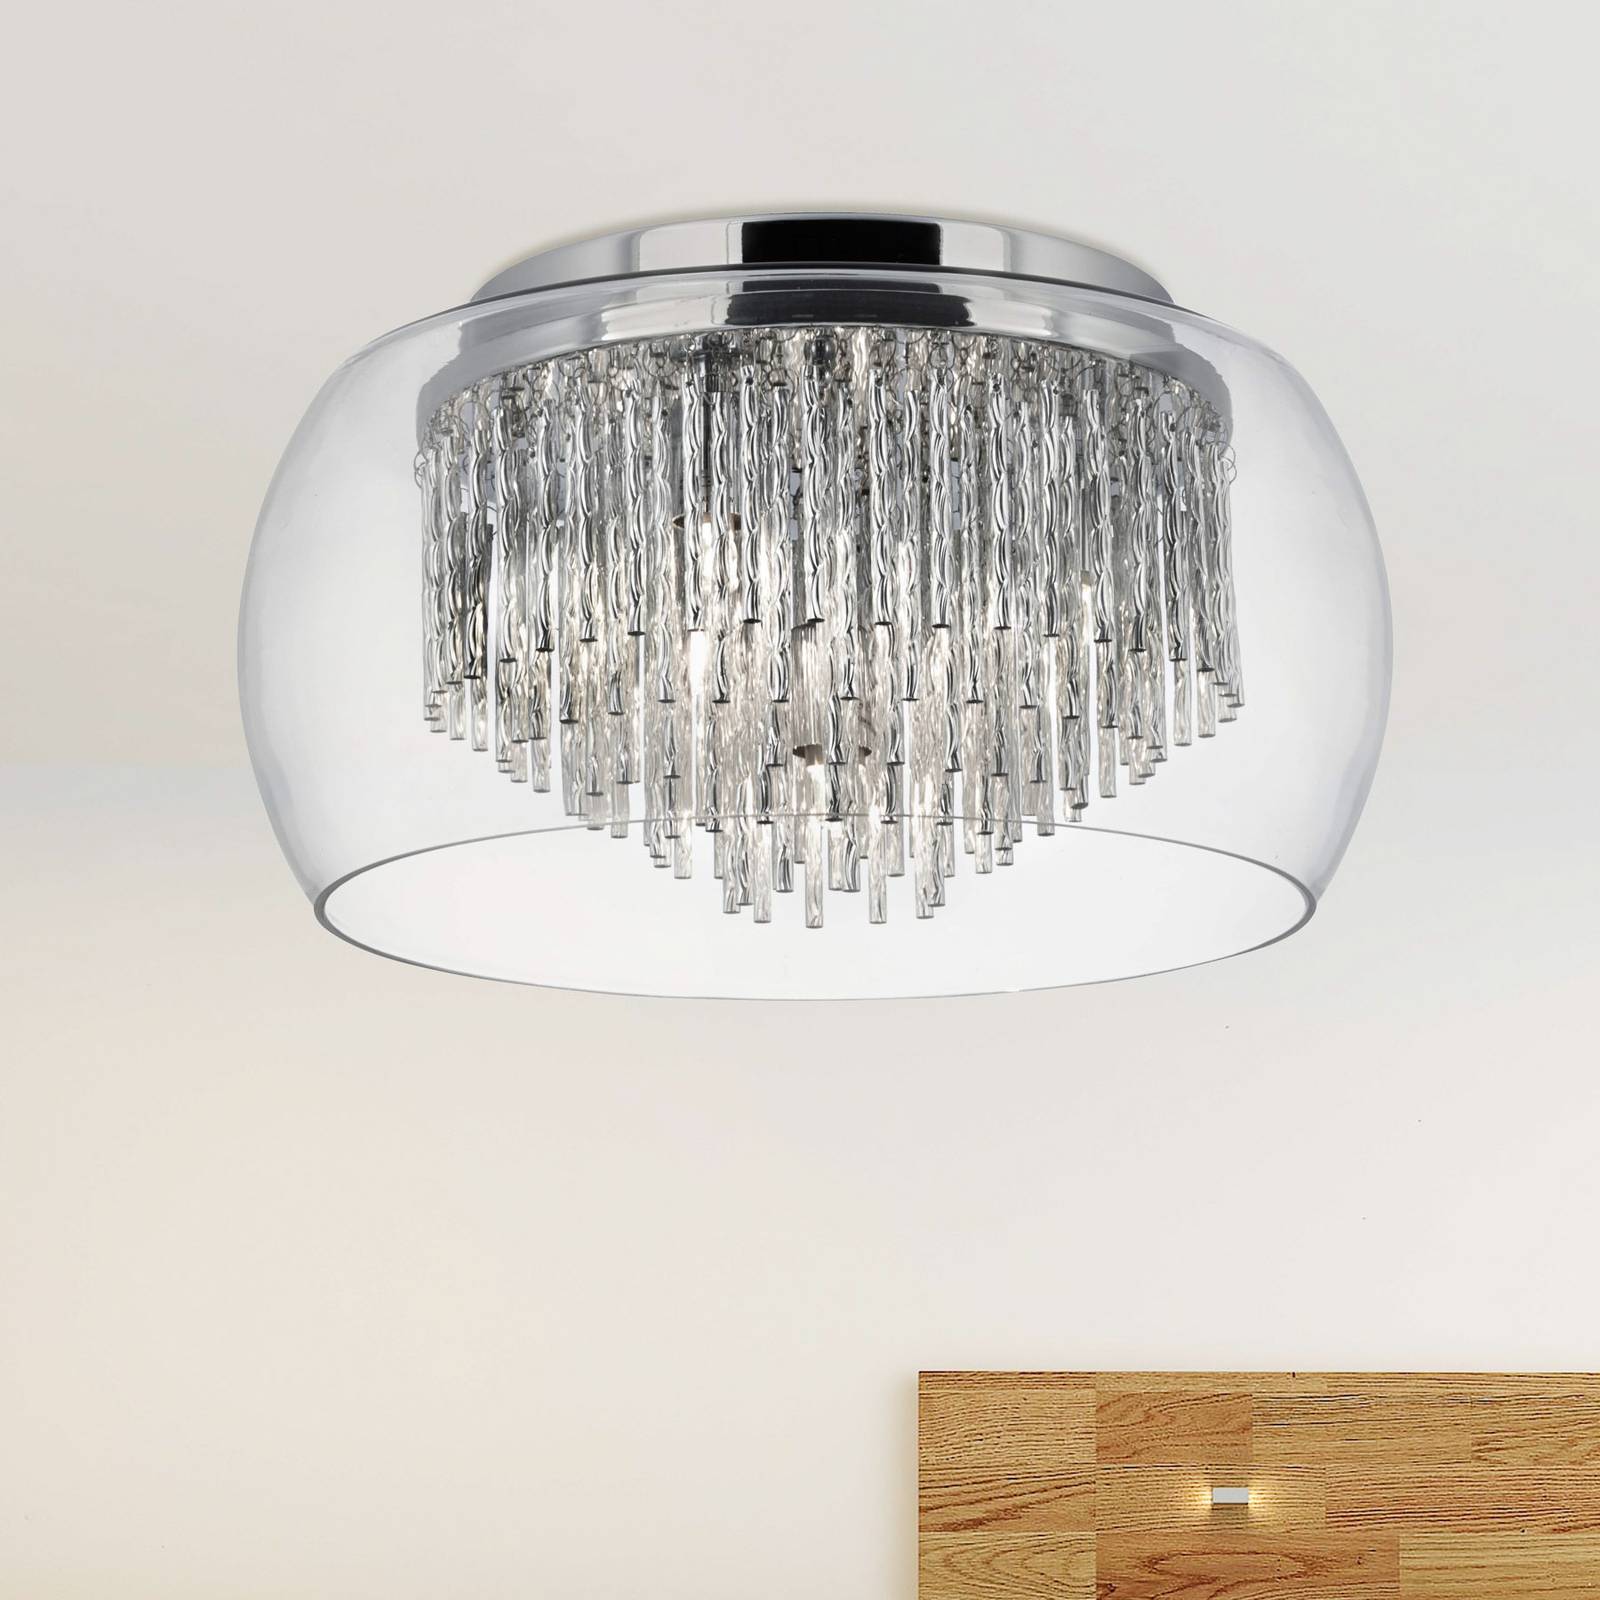 Photos - Chandelier / Lamp Searchlight Curva glass ceiling light with aluminium spirals 